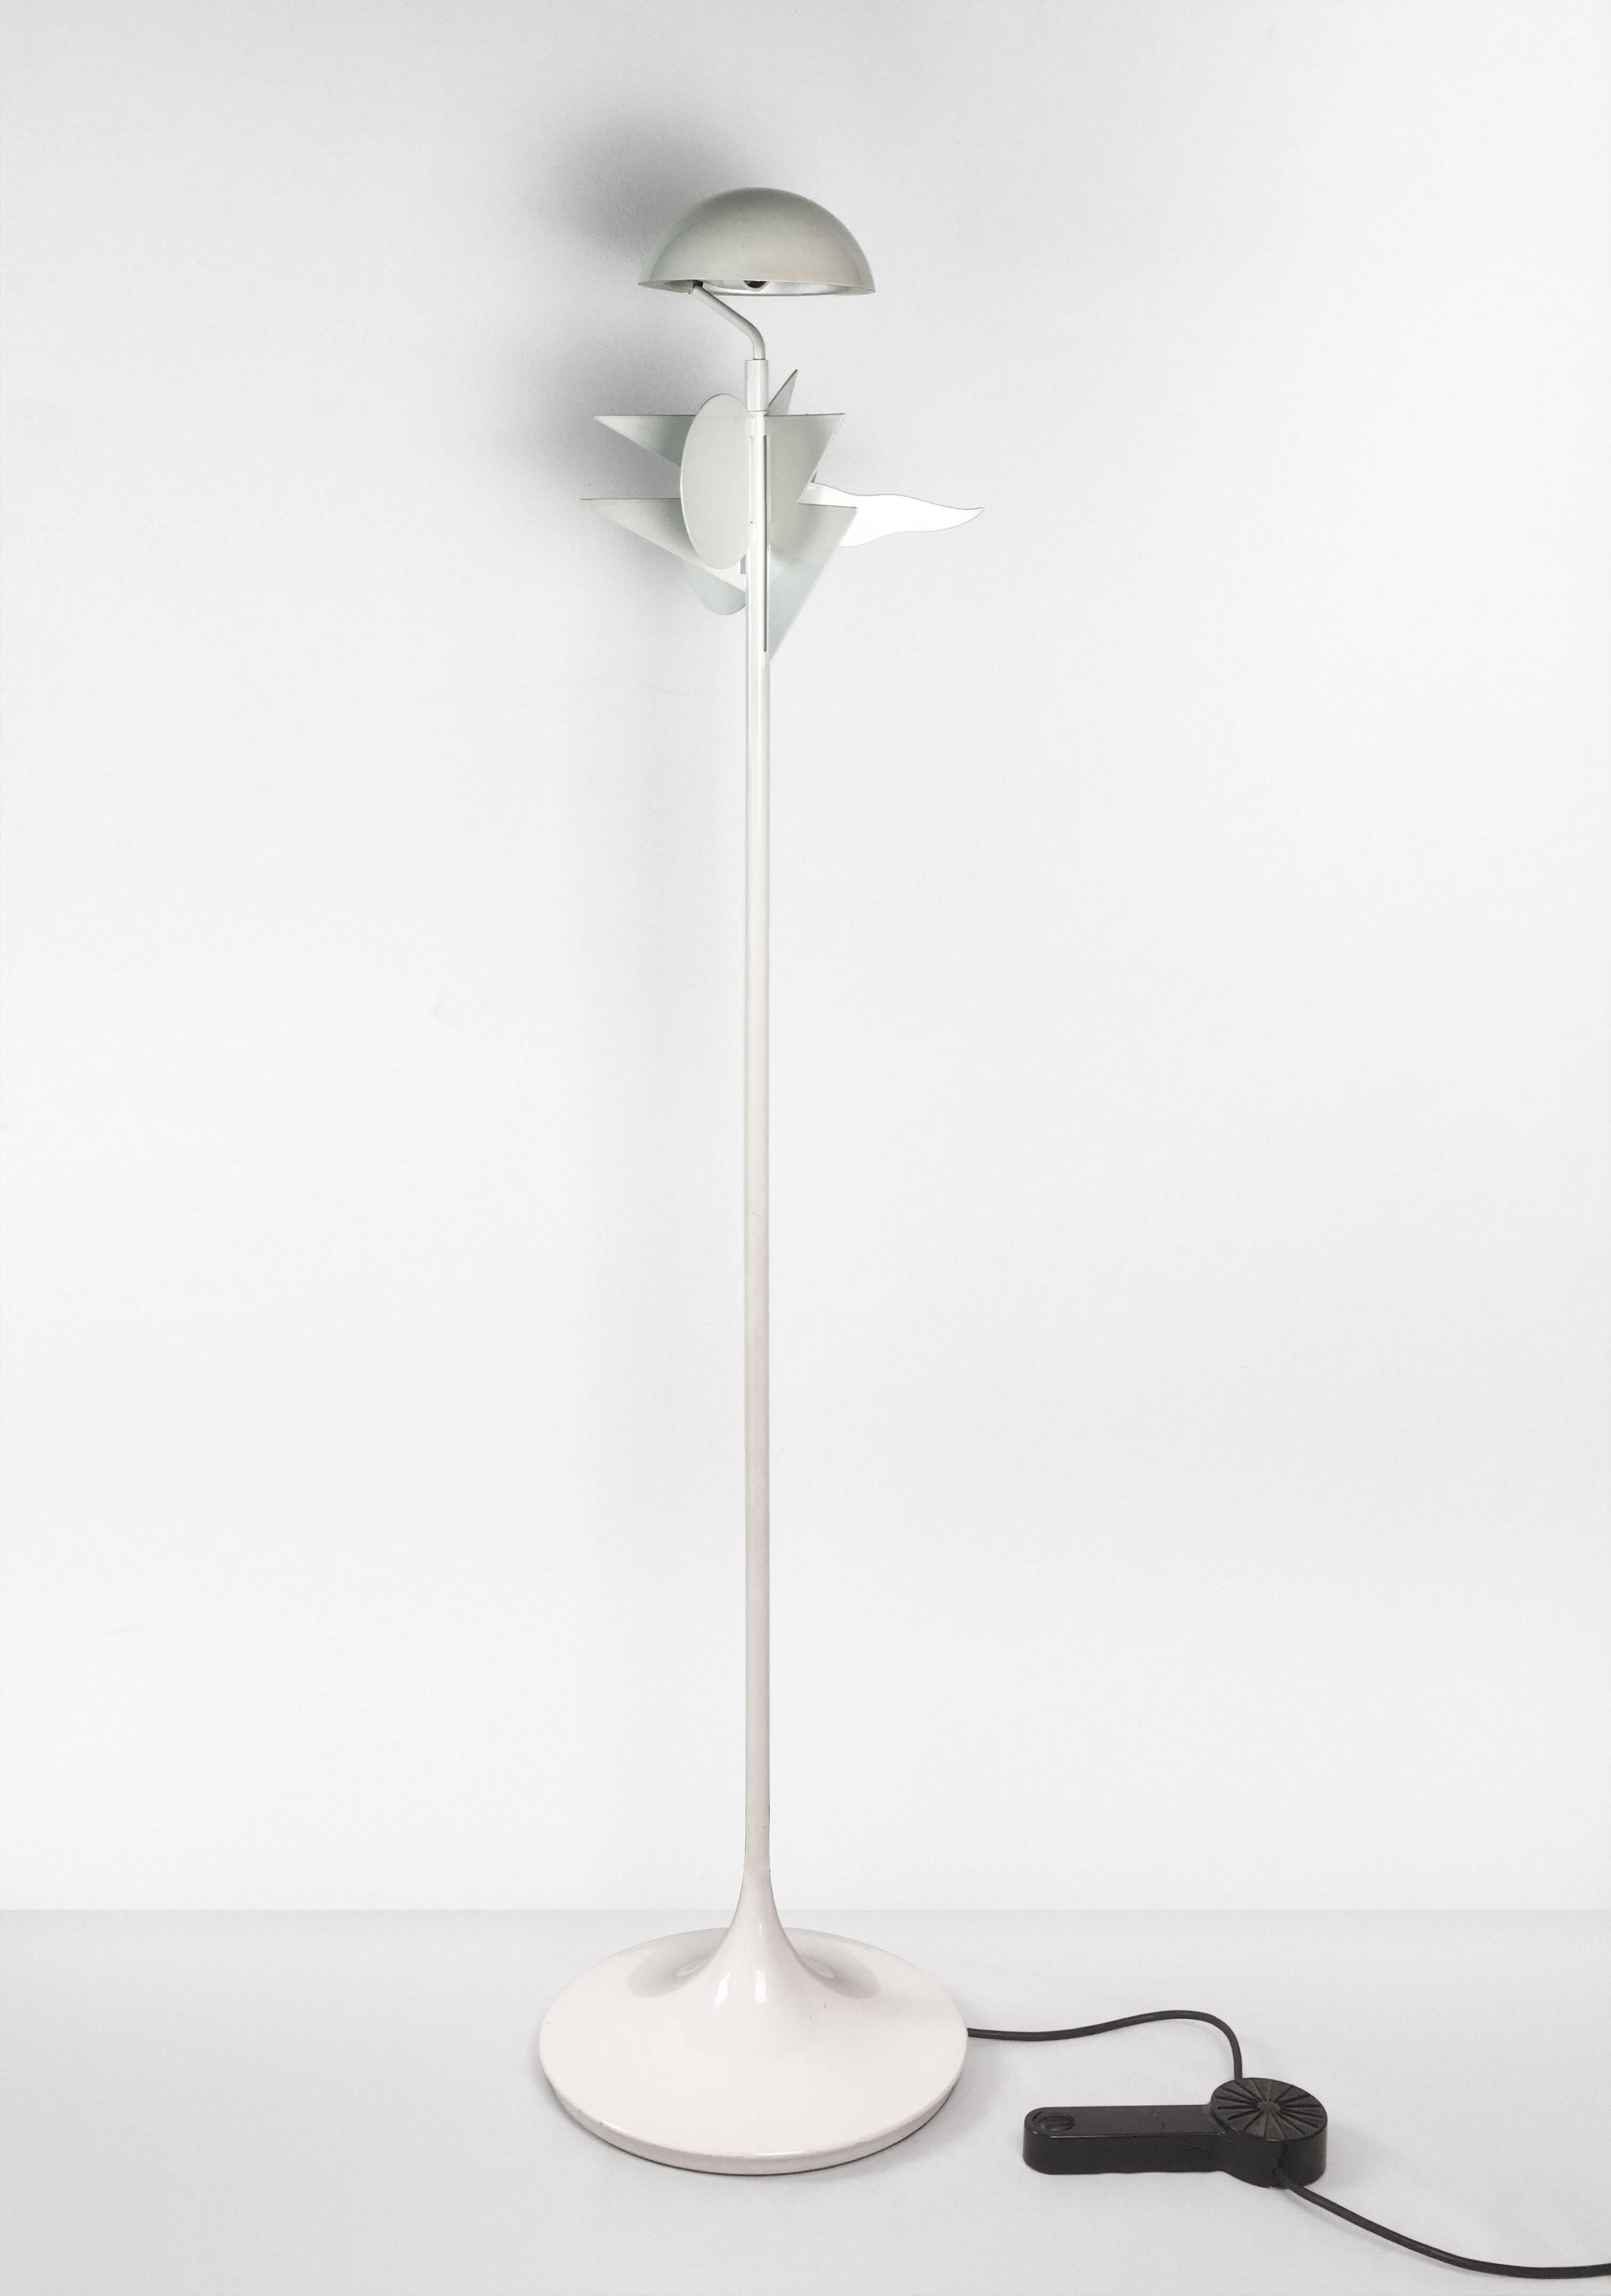 Rare white steel floor lamp designed by Alessandro Mendini, produced by Eleusi. The lamp has dimmer on the wire.